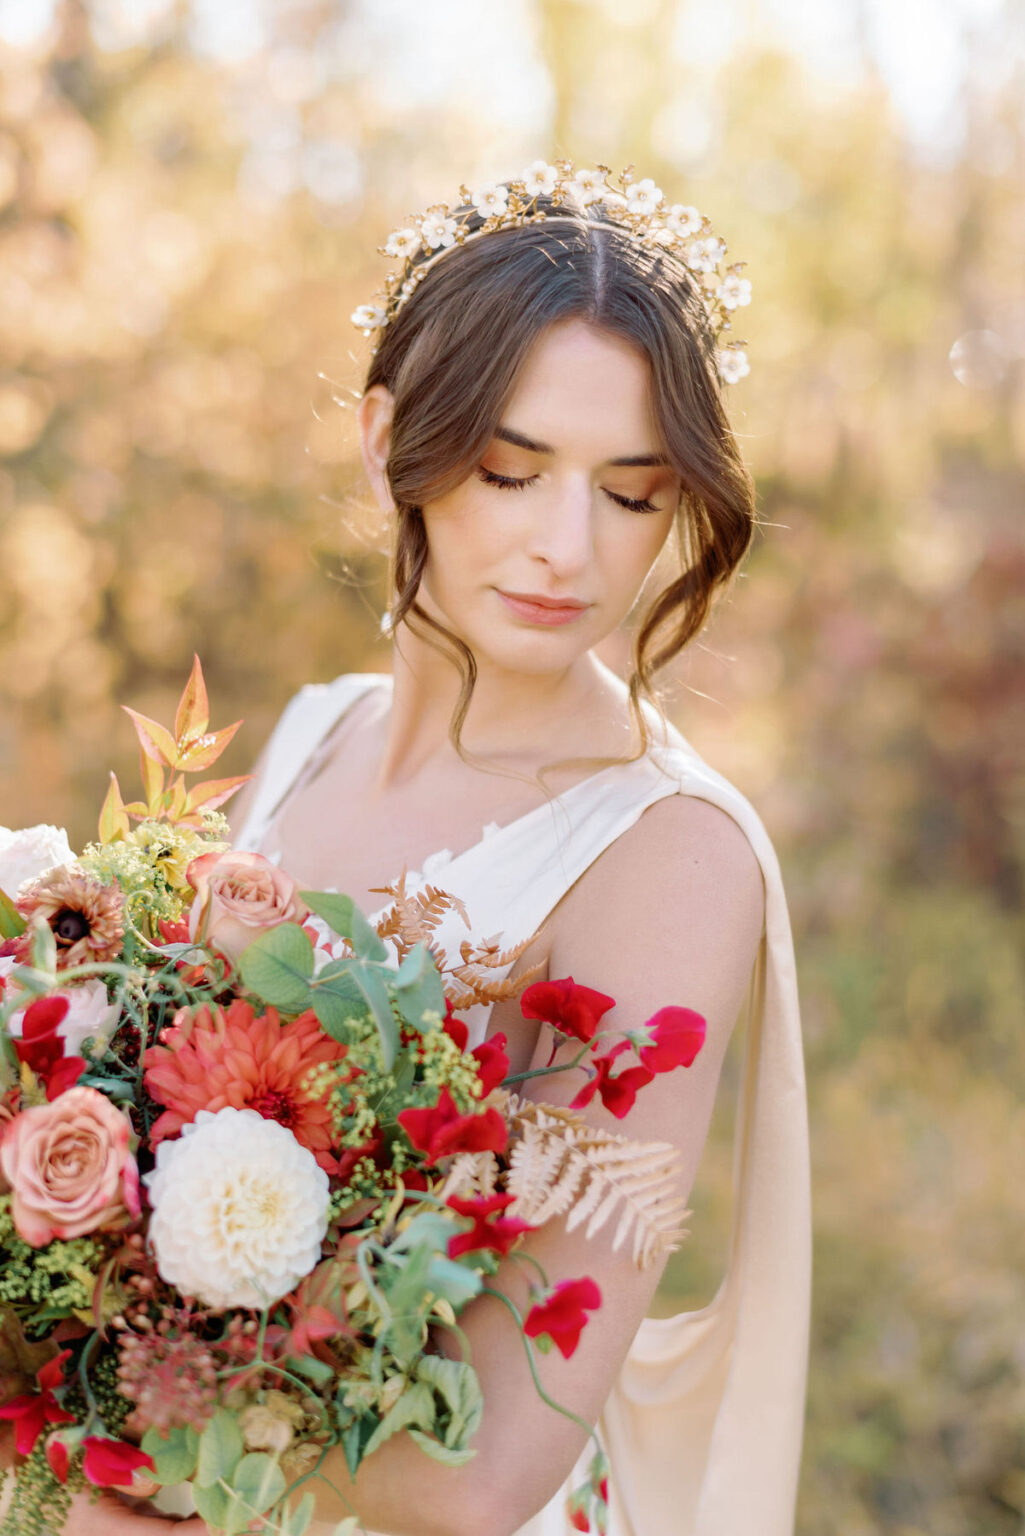 Intimate Autumnal Wedding With Luxury Textures and Al Fresco Dining ⋆ ...